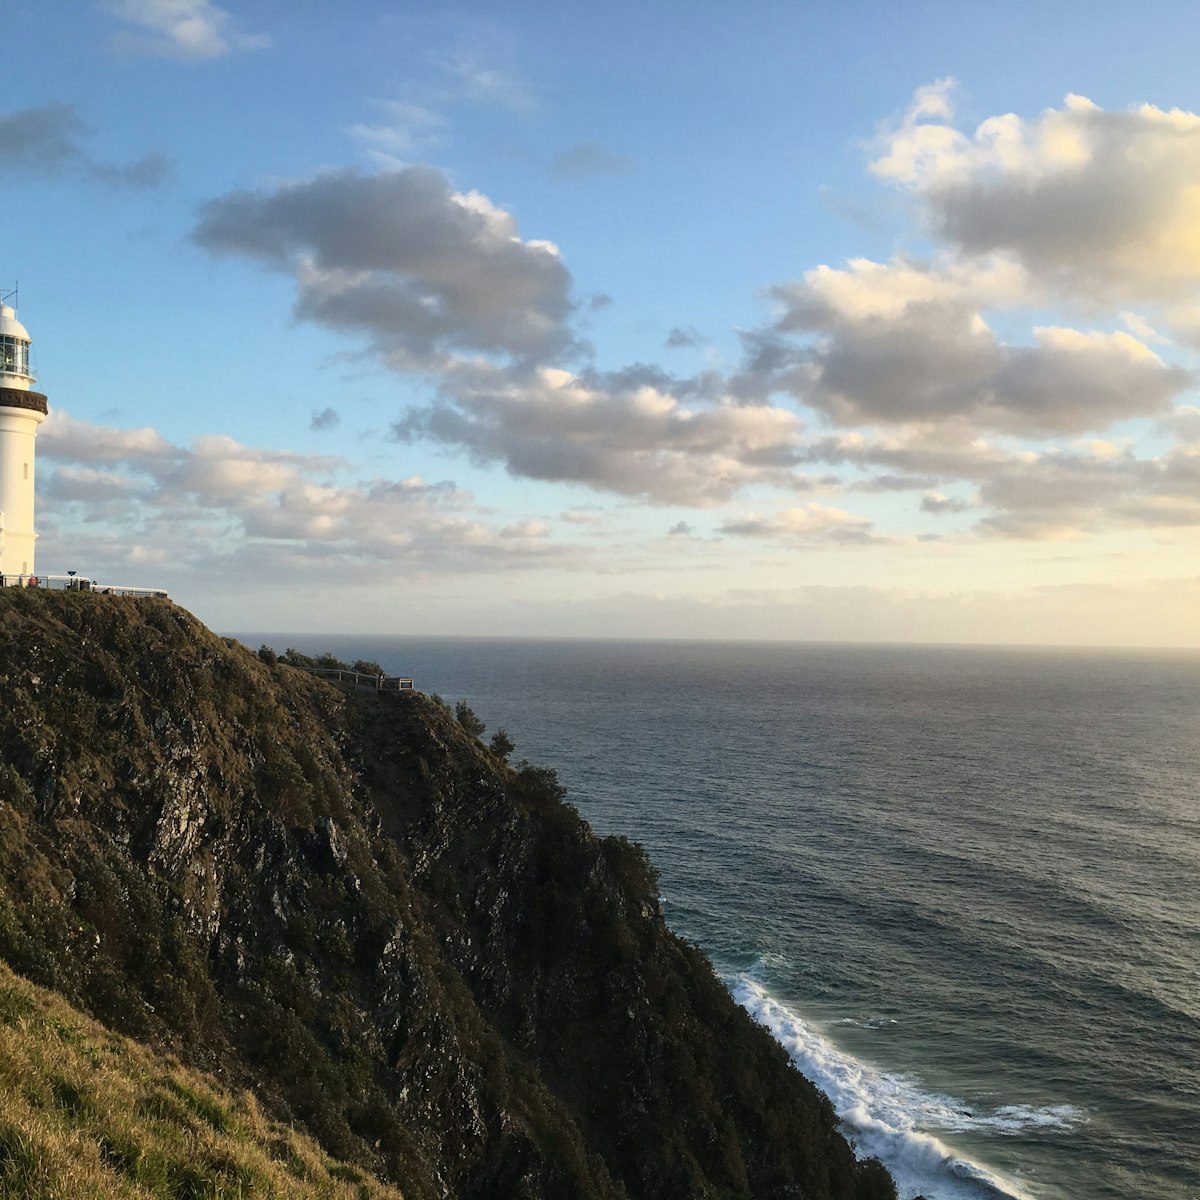 The Cape Byron lighthouse at dawn